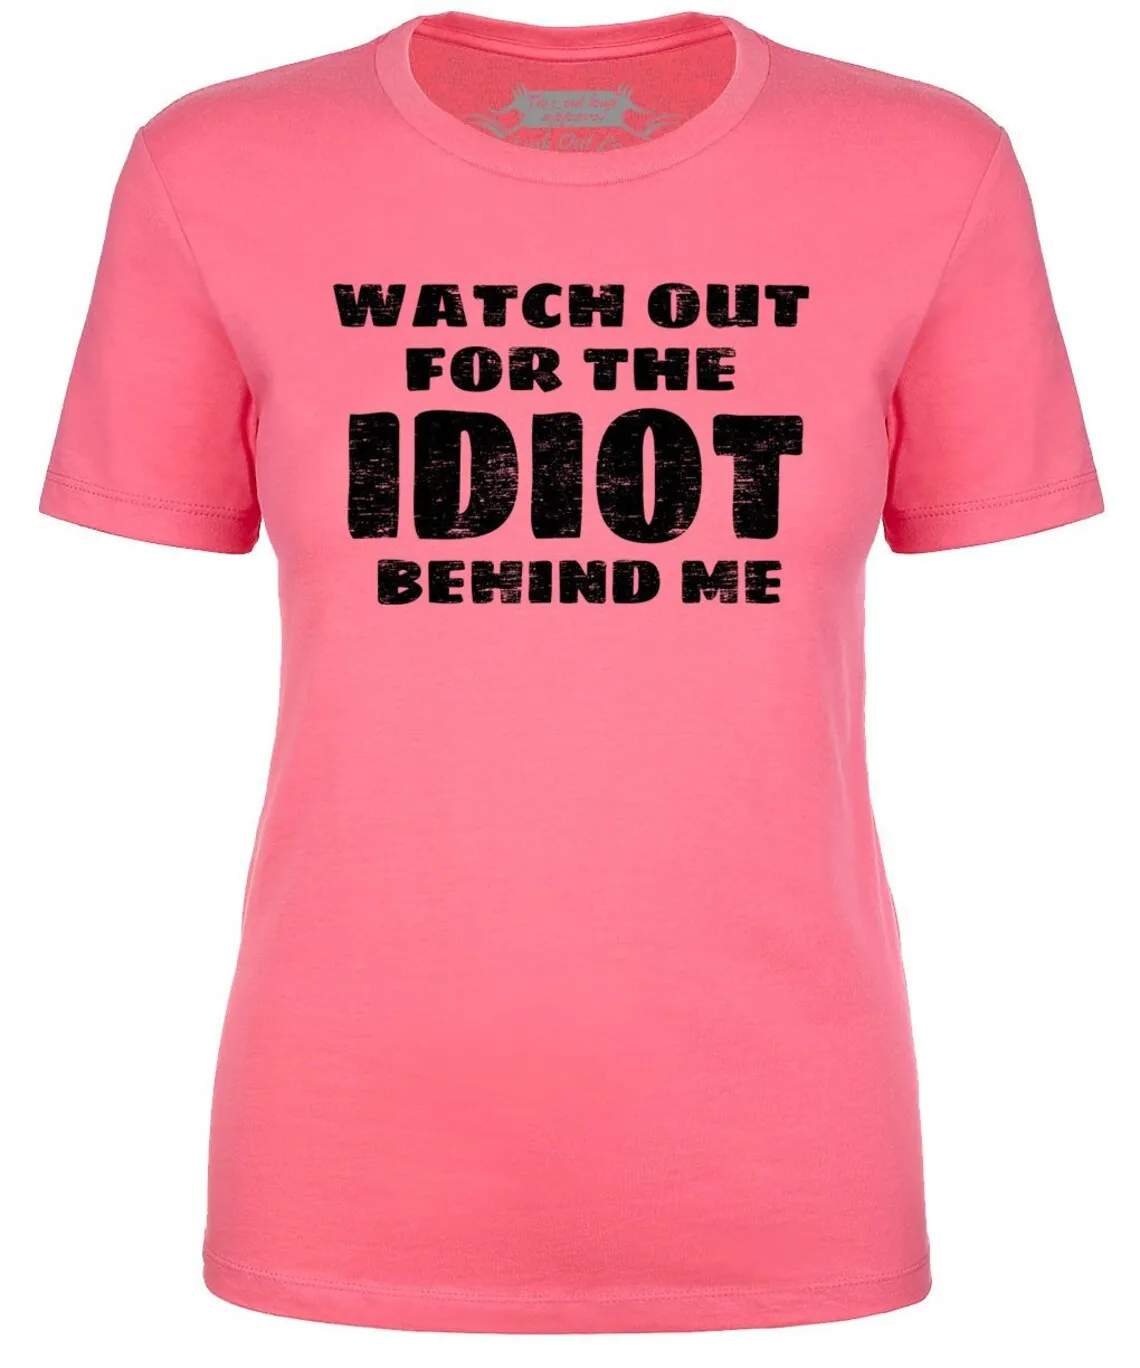 

Watch Out for the Idiot Behind me Funny Ladies T shirt joke humor tee